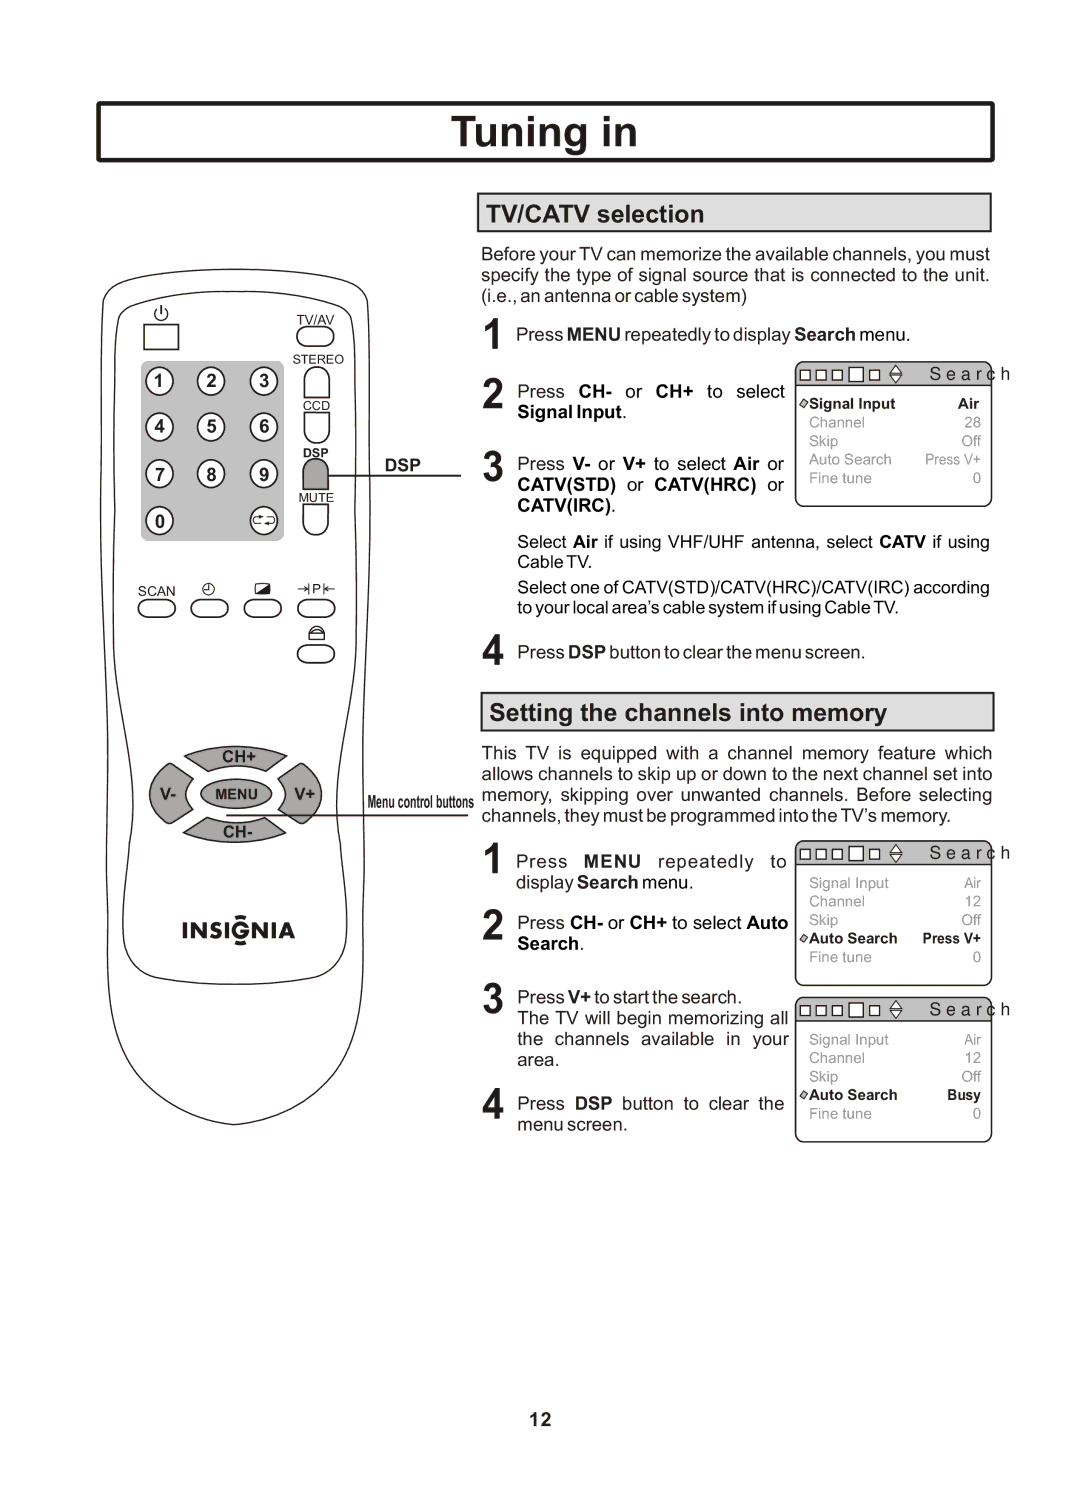 Insignia IS-TV040922 user manual Tuning, TV/CATV selection, Setting the channels into memory 